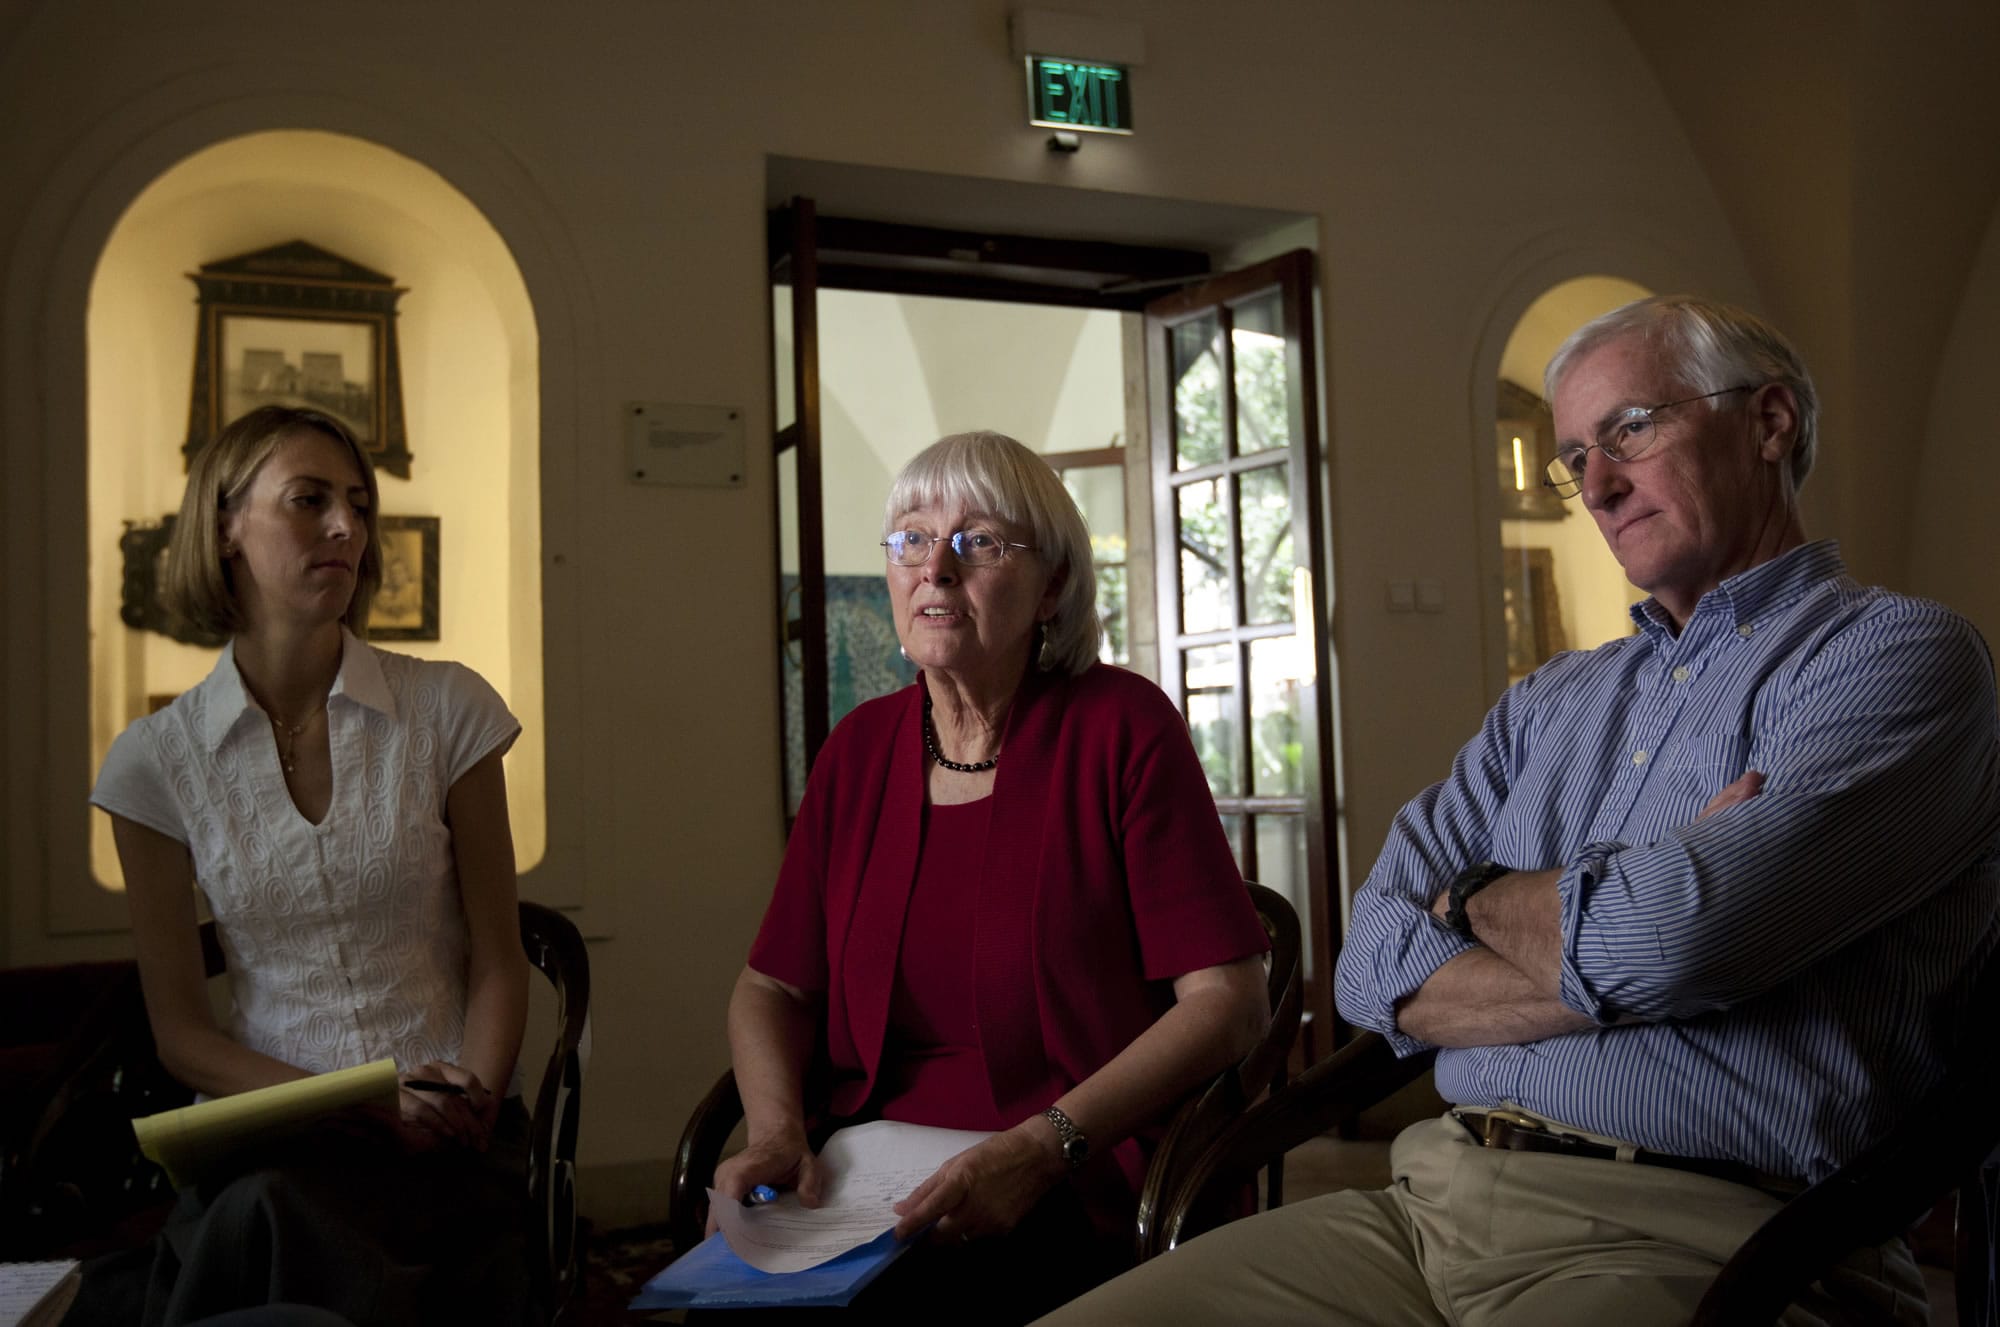 Cindy, center, and Craig Corrie, right, the parents of Rachel Corrie, a pro-Palestinian activist who was killed by an Israeli bulldozer in Gaza in 2003, sit with their daughter Sarah during an interview in Jerusalem on Sunday.